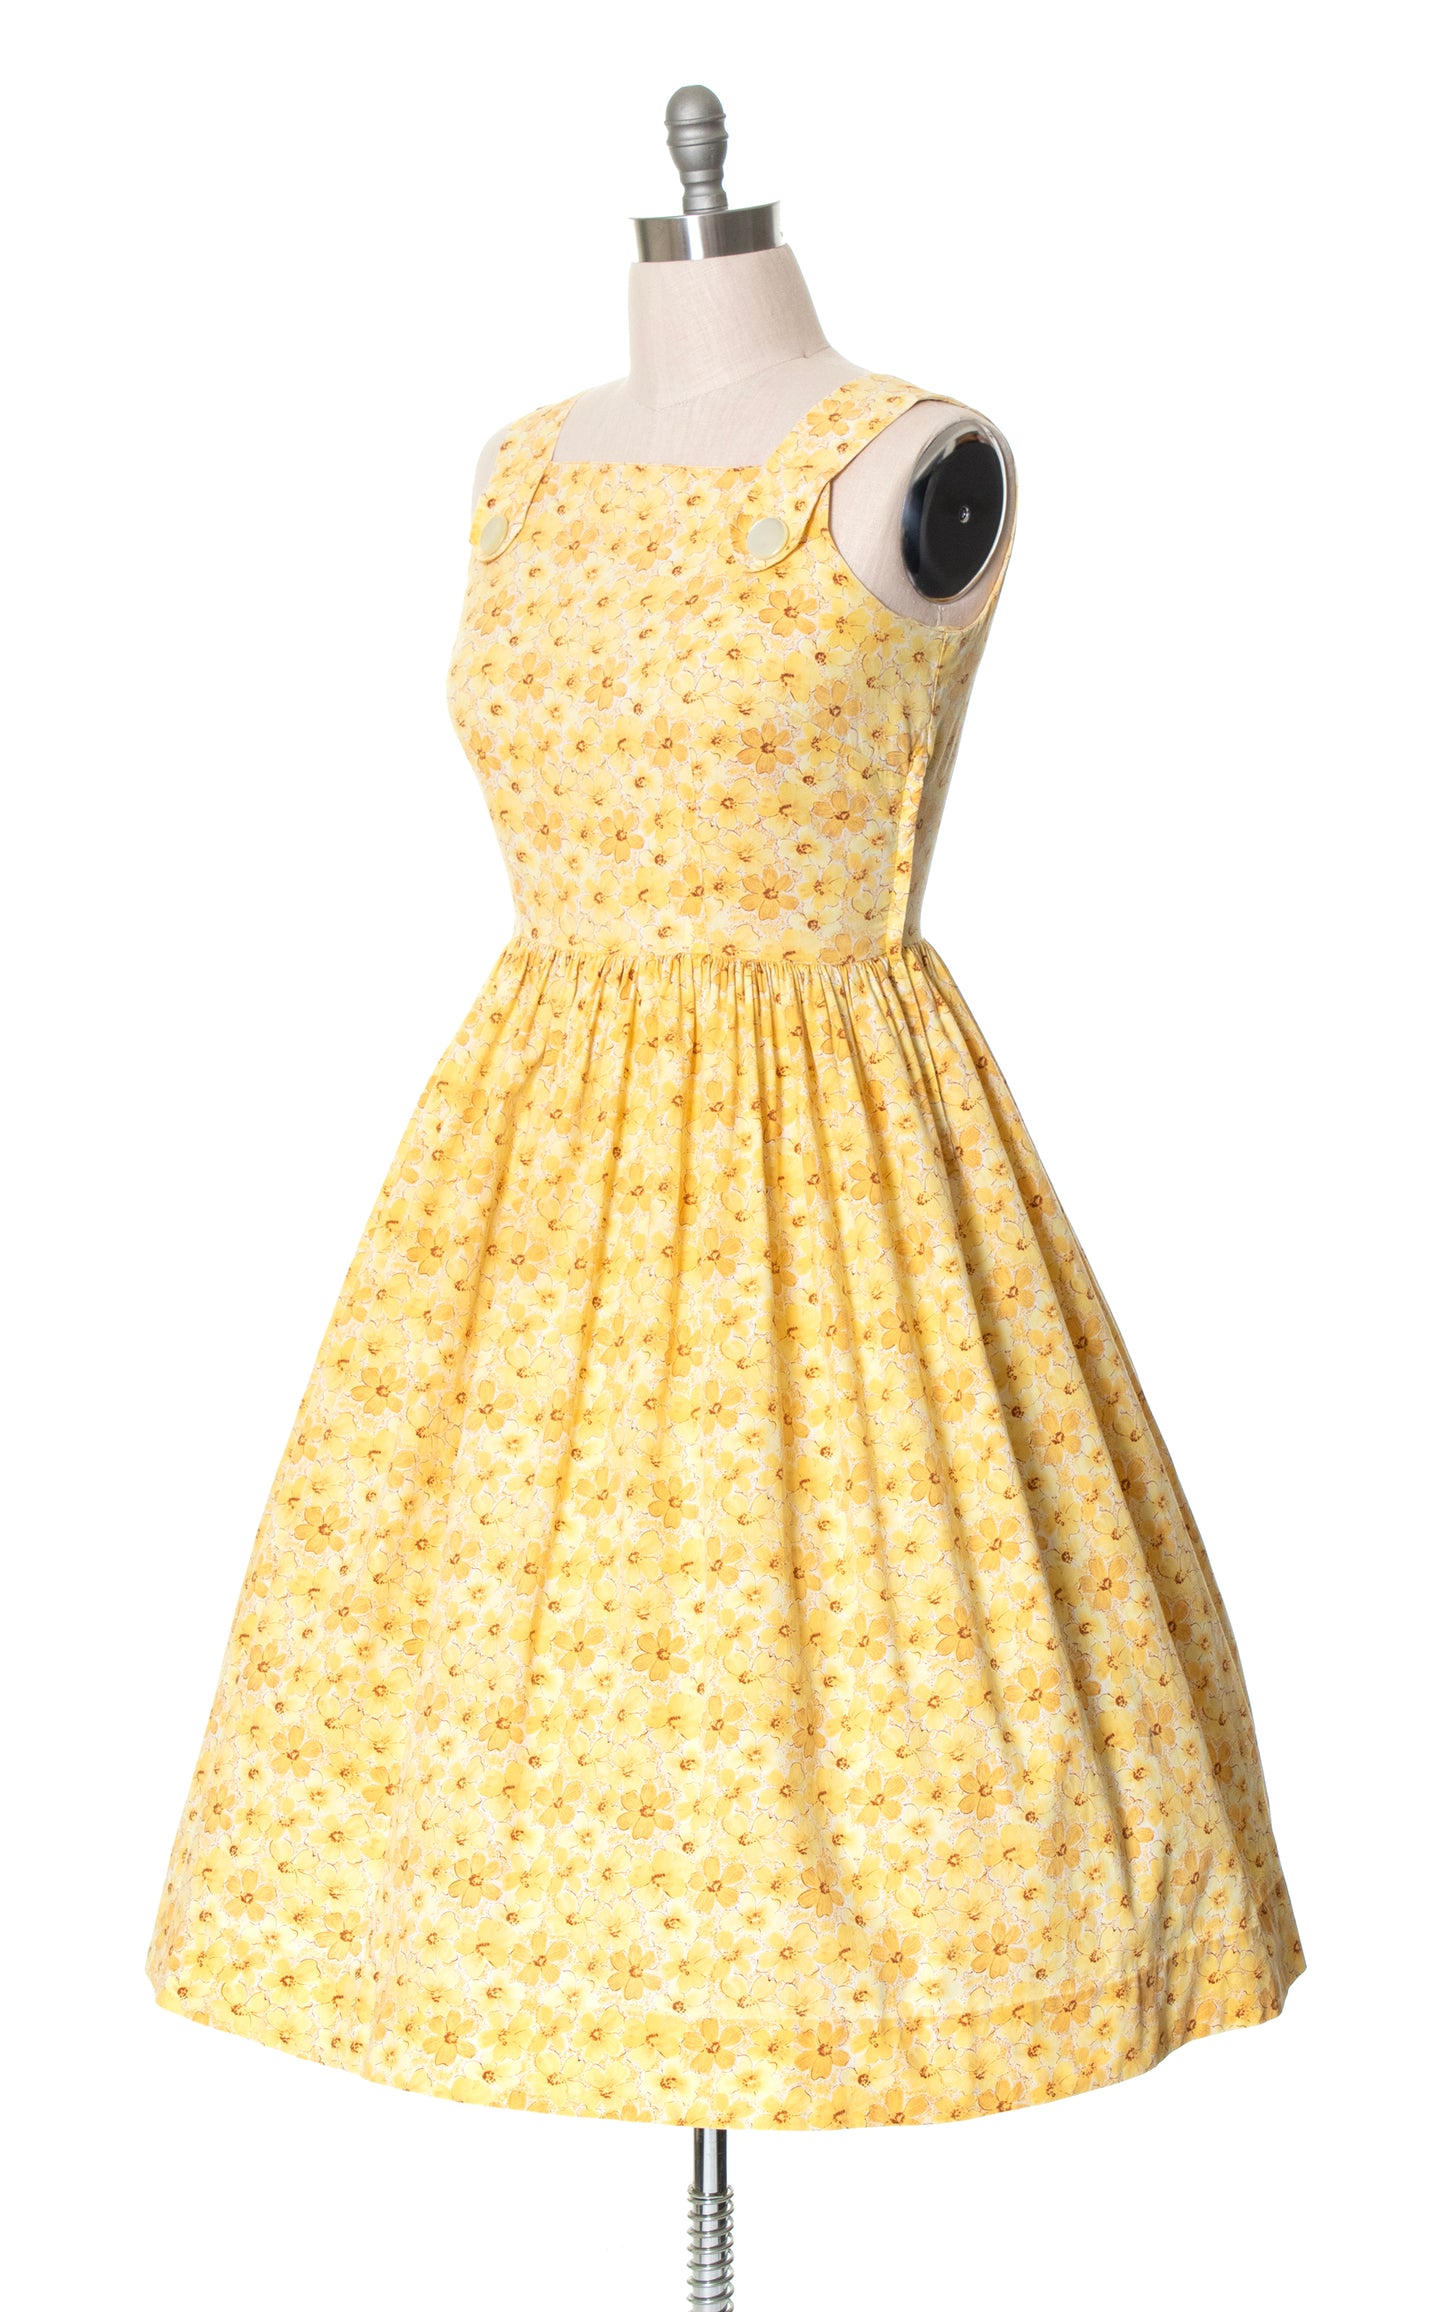 Vintage 50s 1950s Yellow Floral Cotton Sundress Fit and Flare Day Dress BirthdayLifeVintage